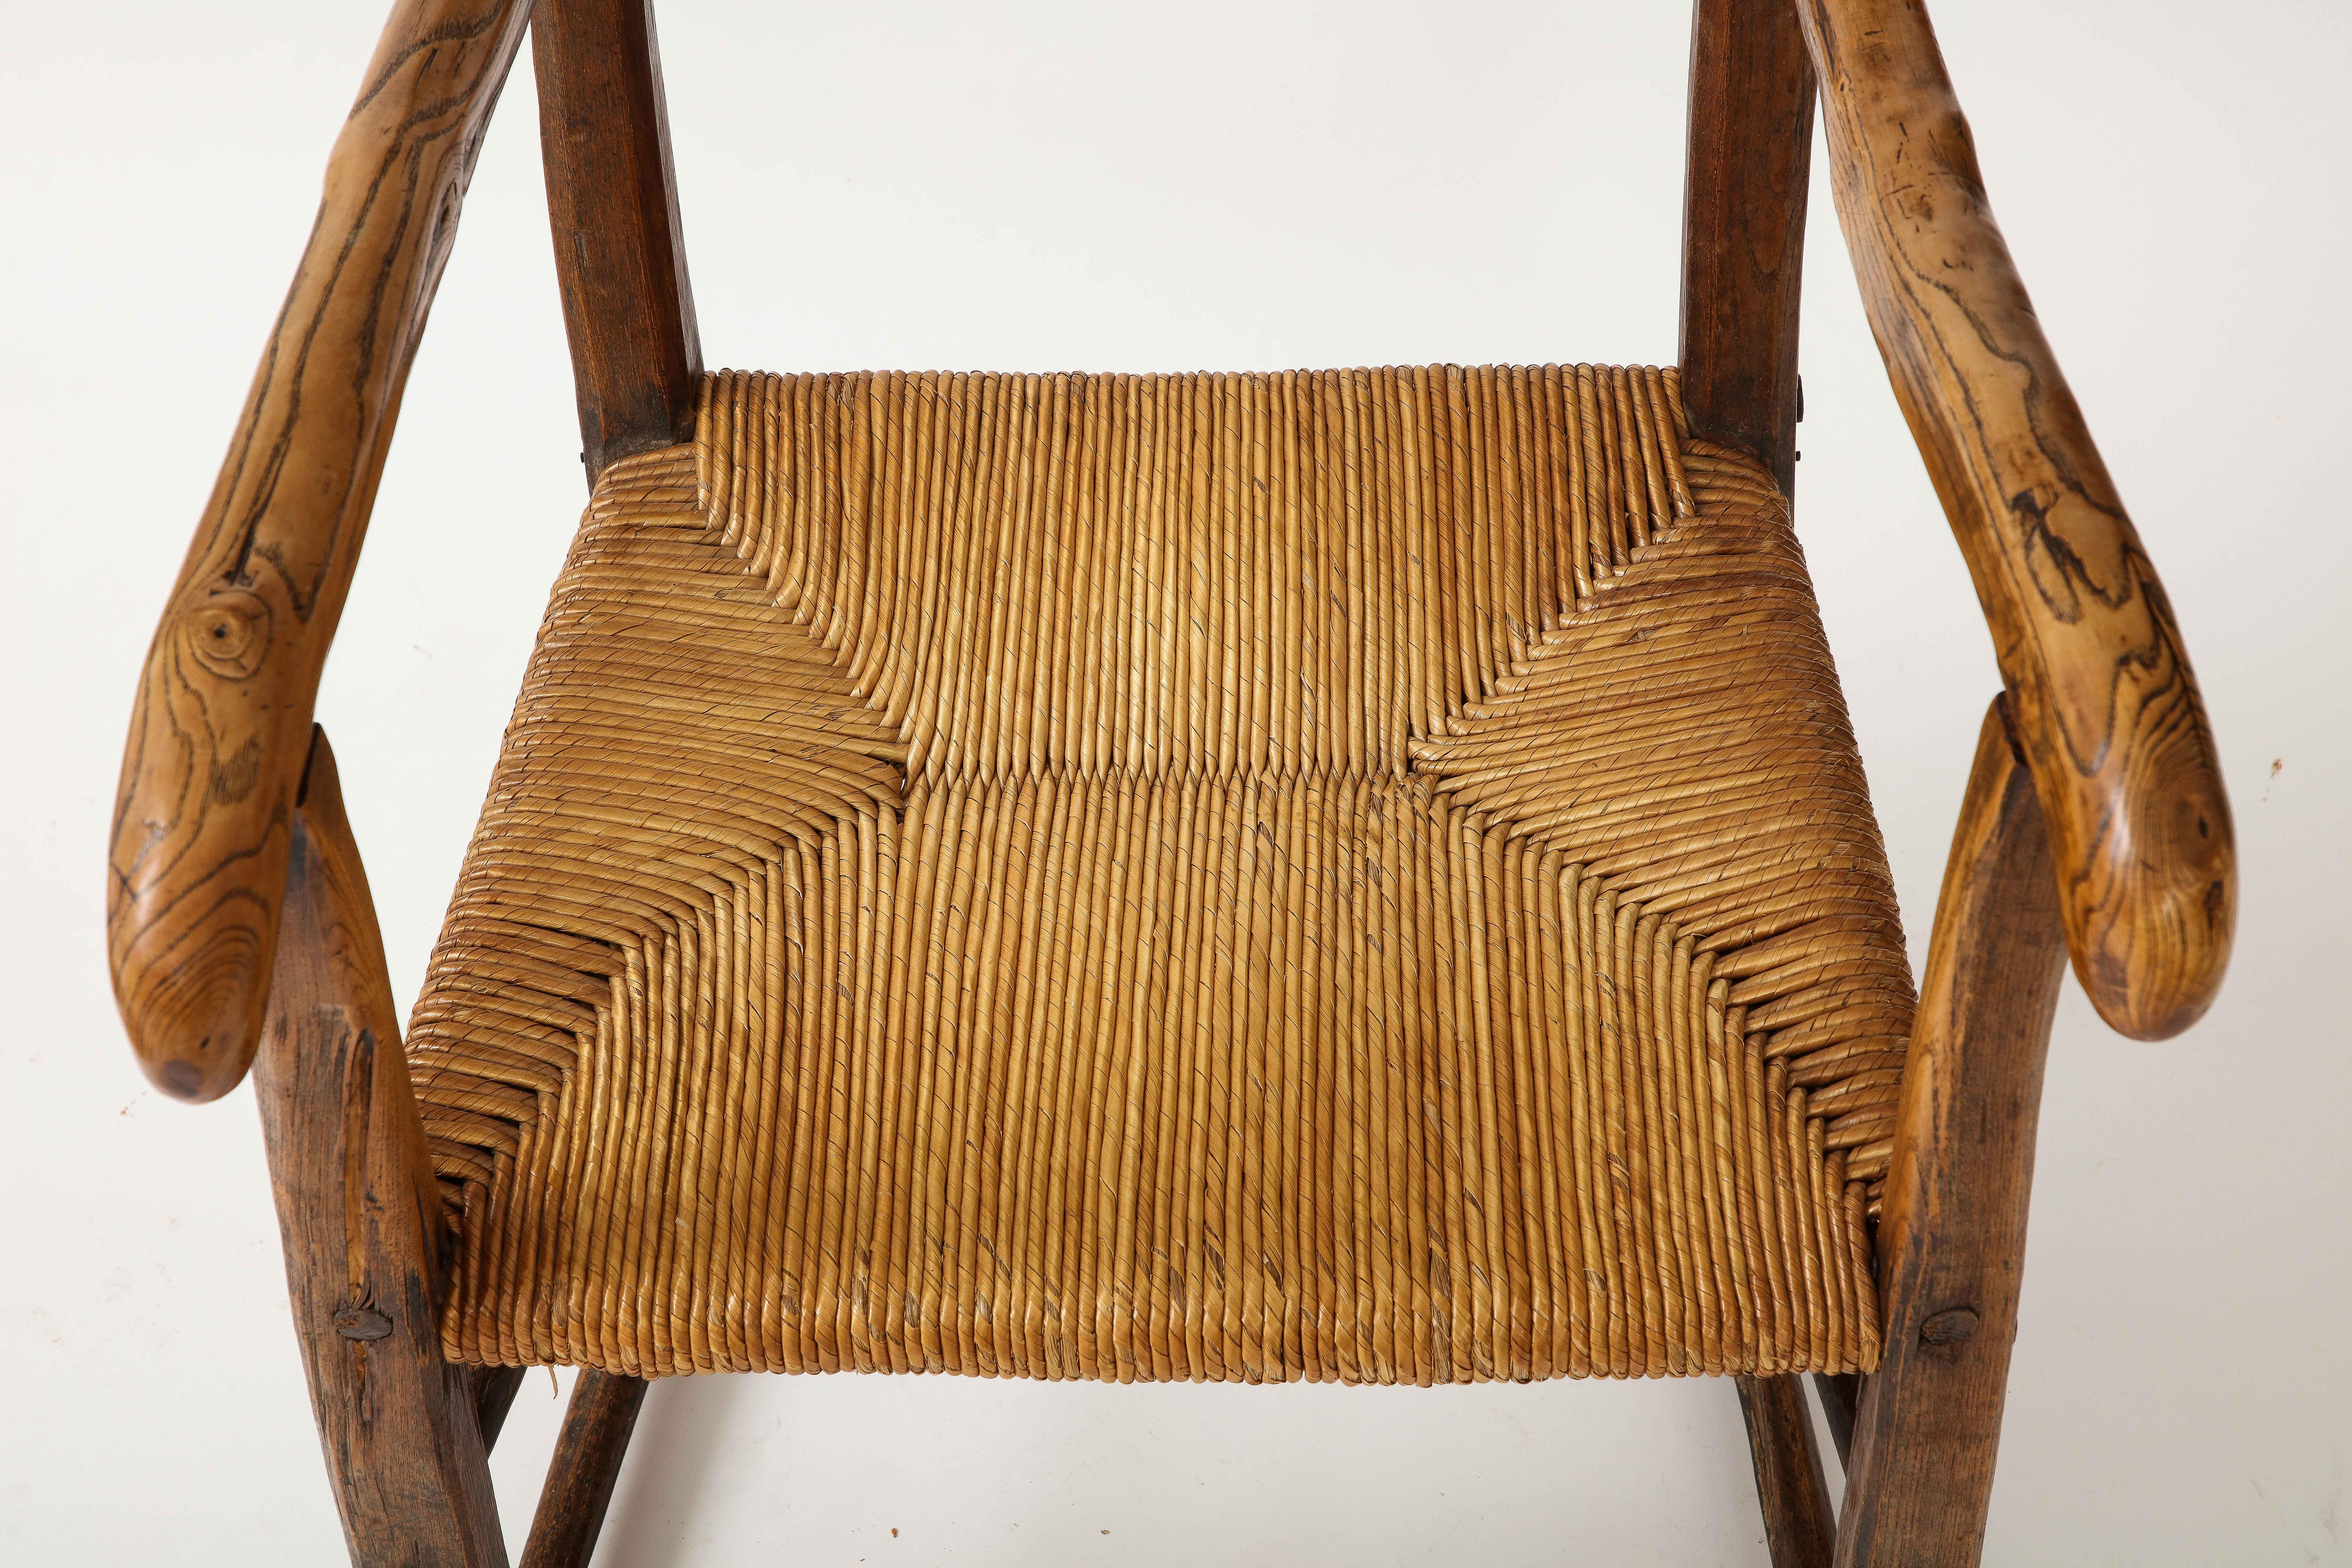 19th Century Rustic French Chair with Straw Seat In Good Condition For Sale In Brooklyn, NY